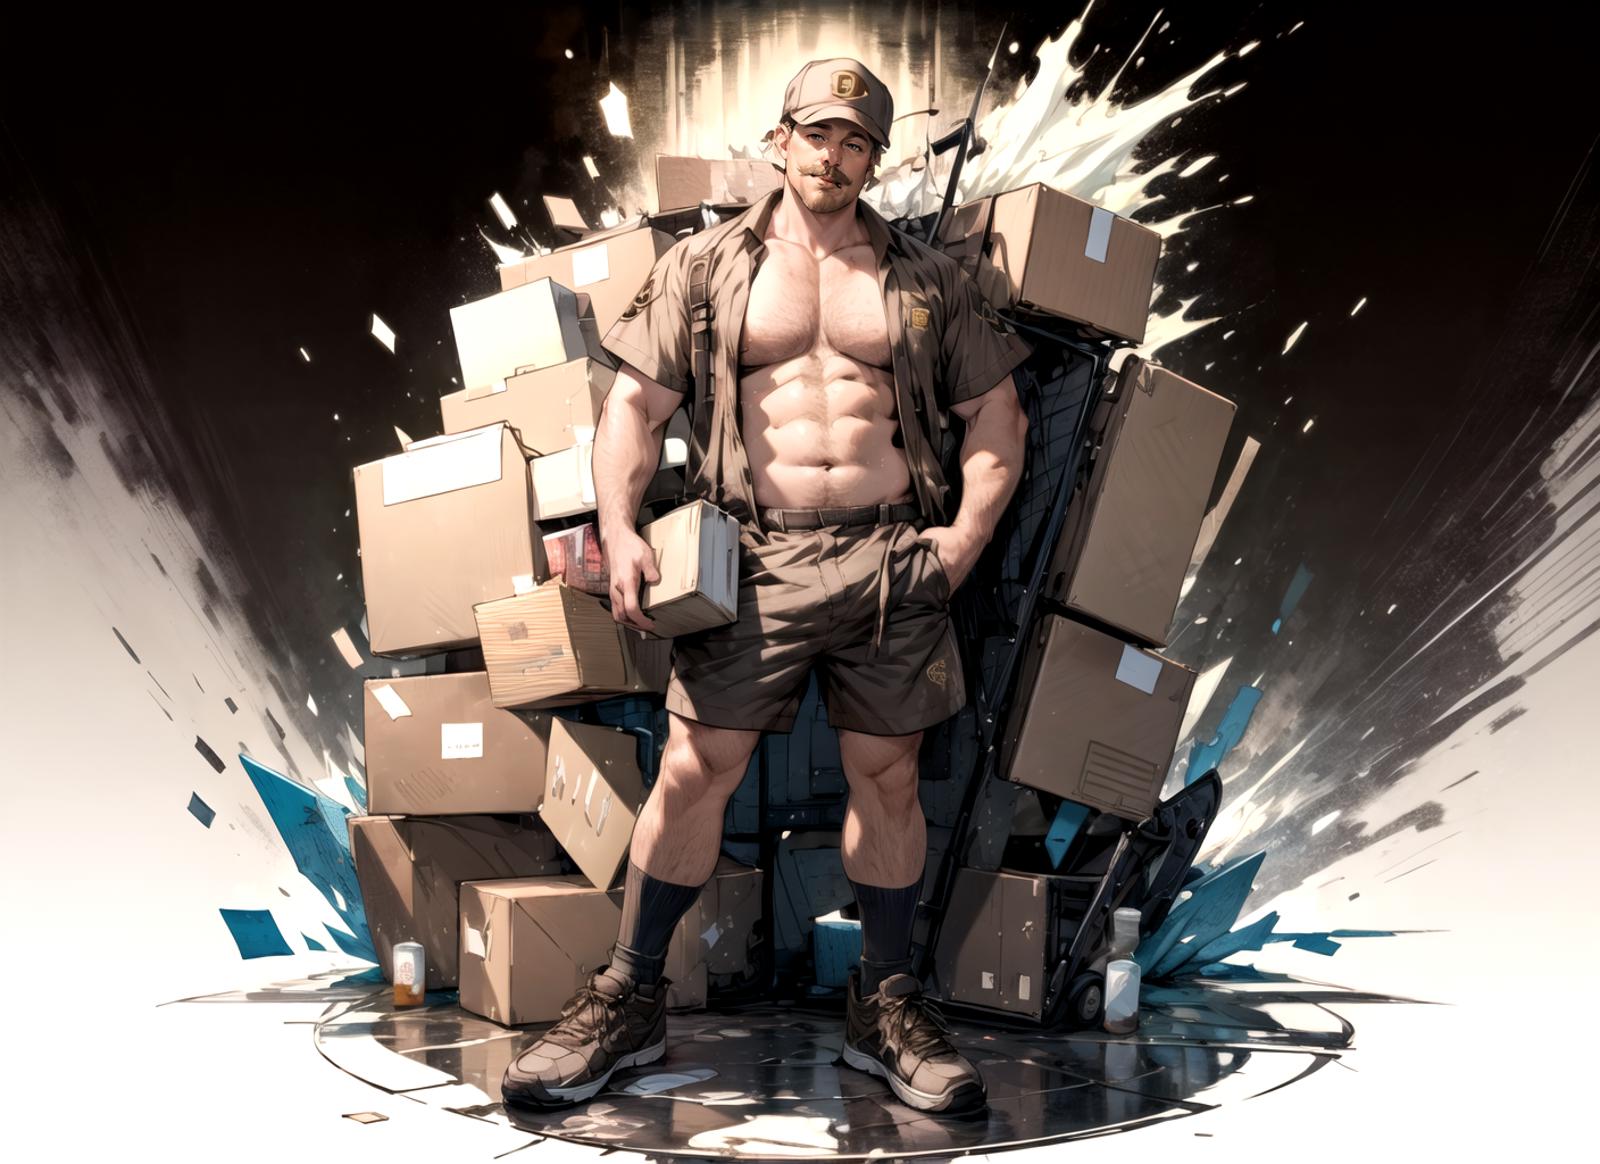 Sexy Delivery Man image by lonelykoala